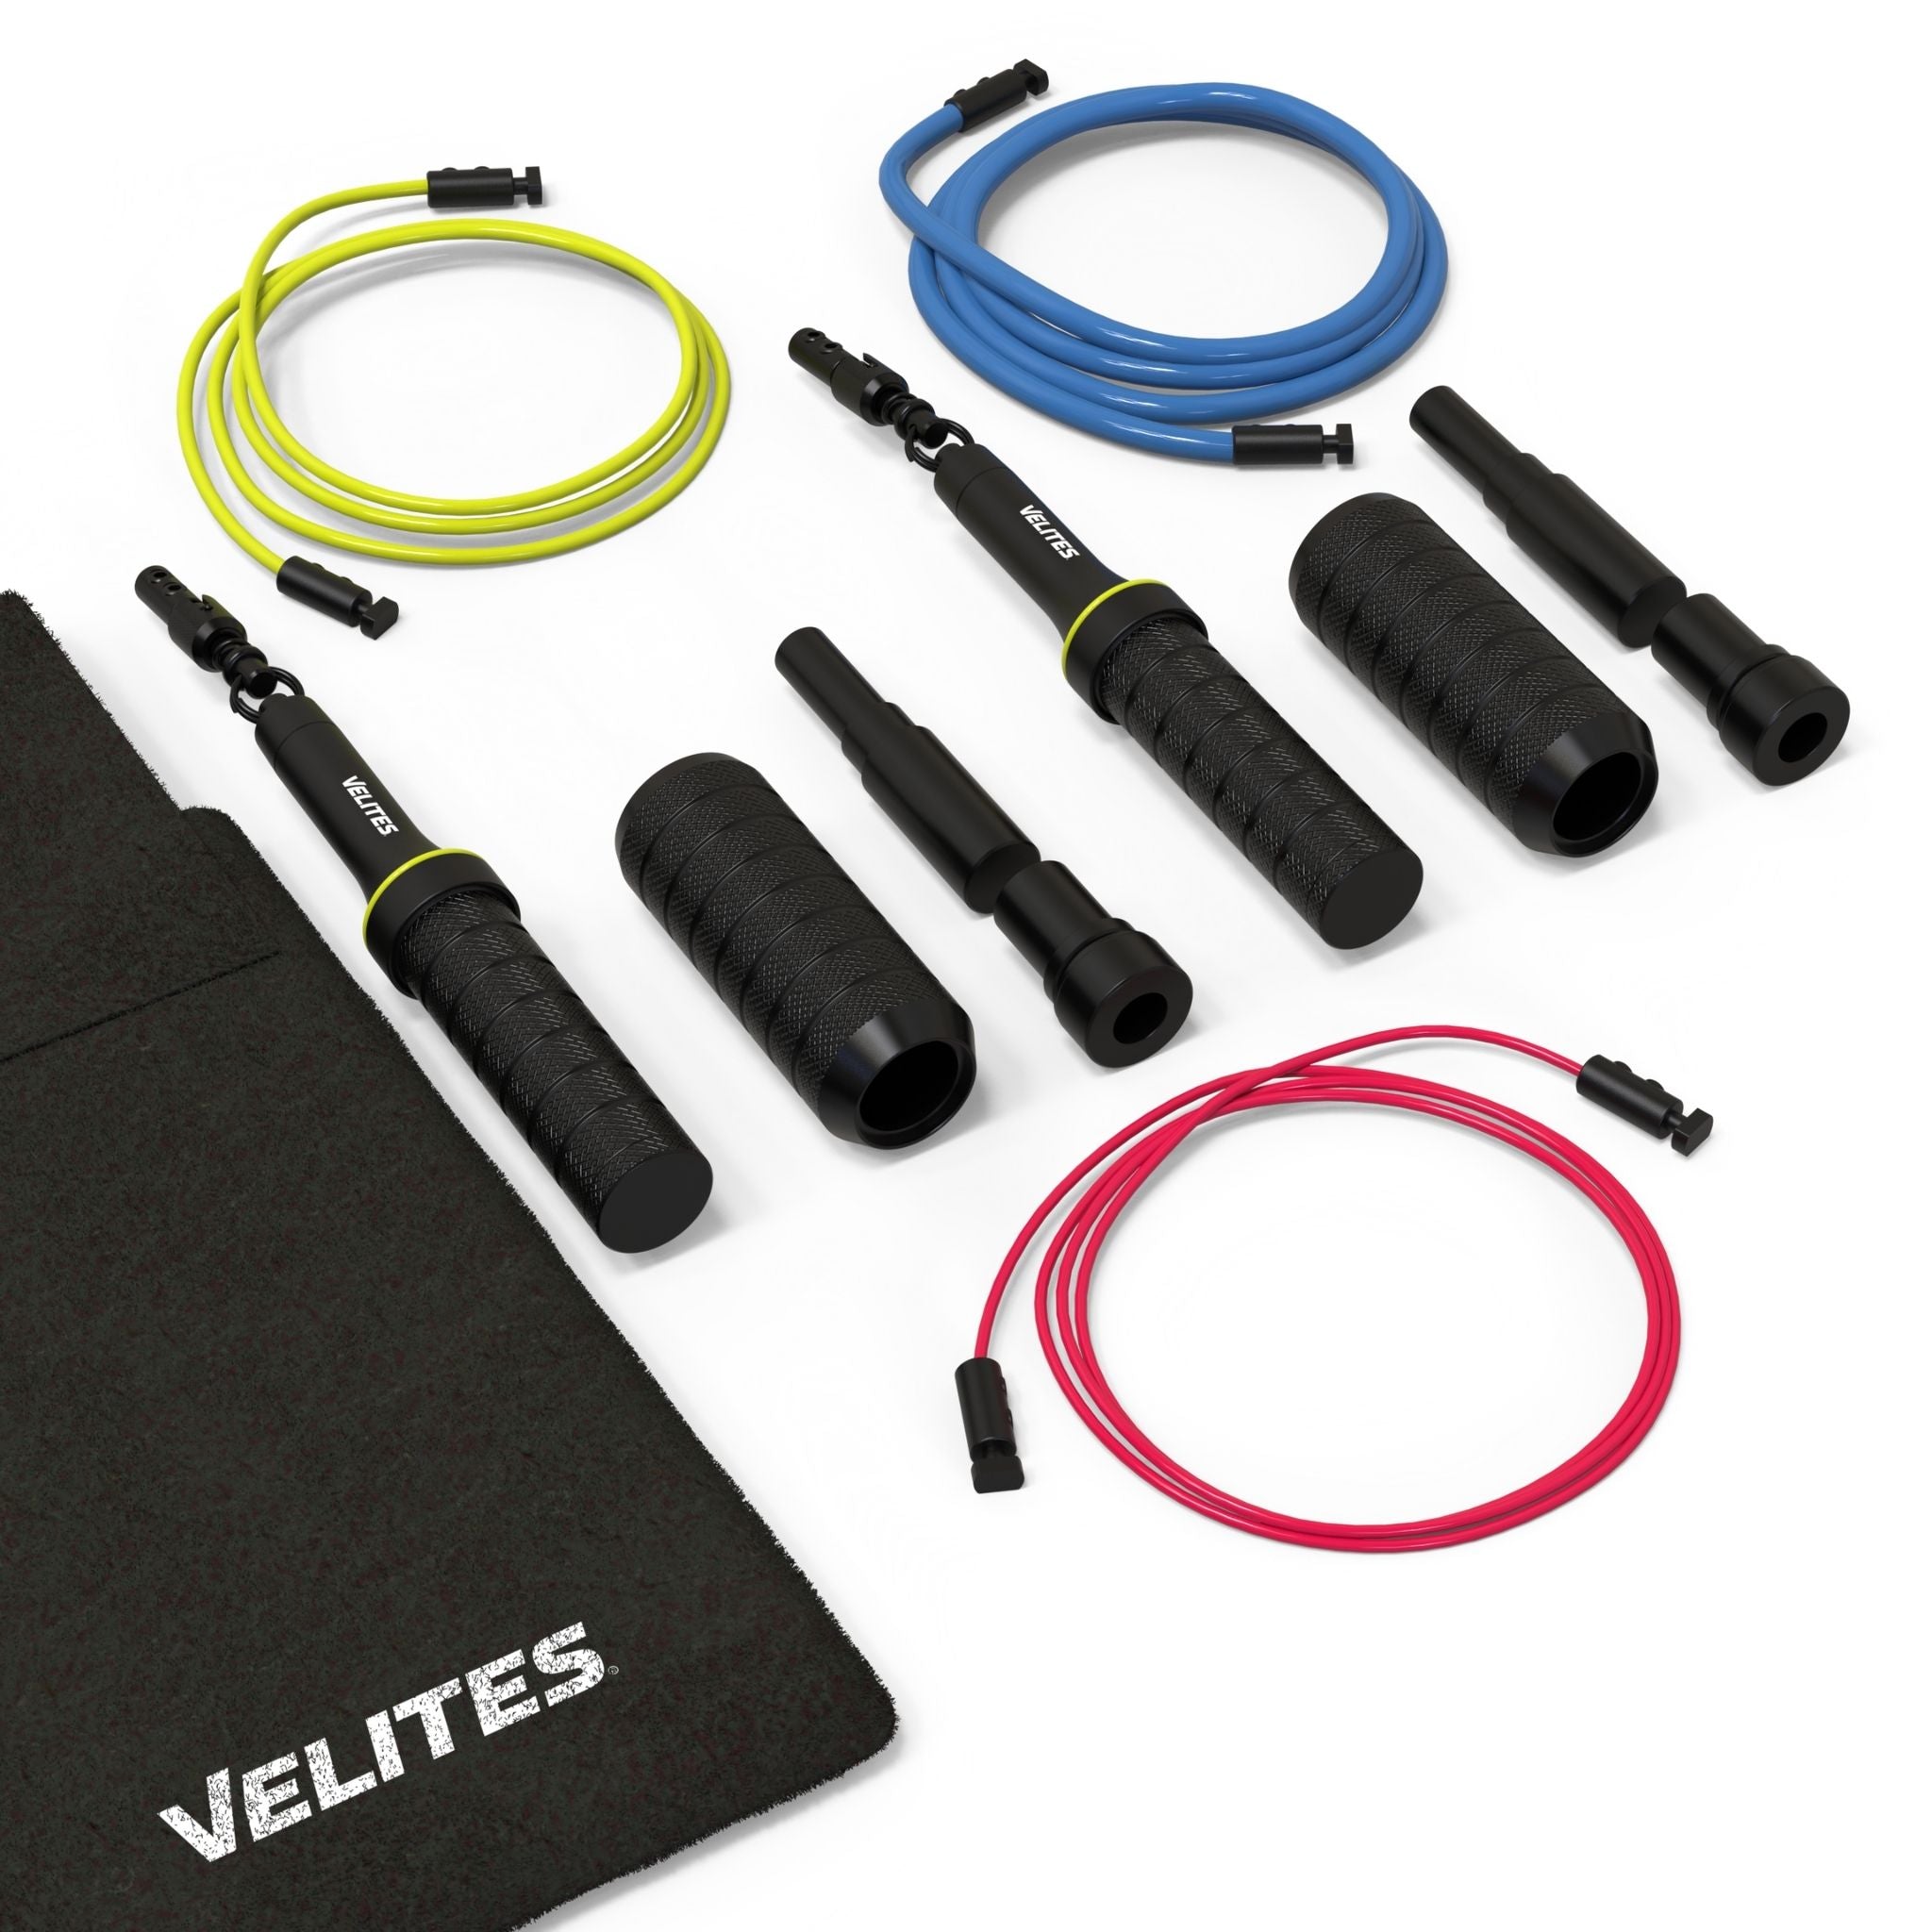 Pack Comba Earth 2.0 Velites + Lastres + Cables  MKP